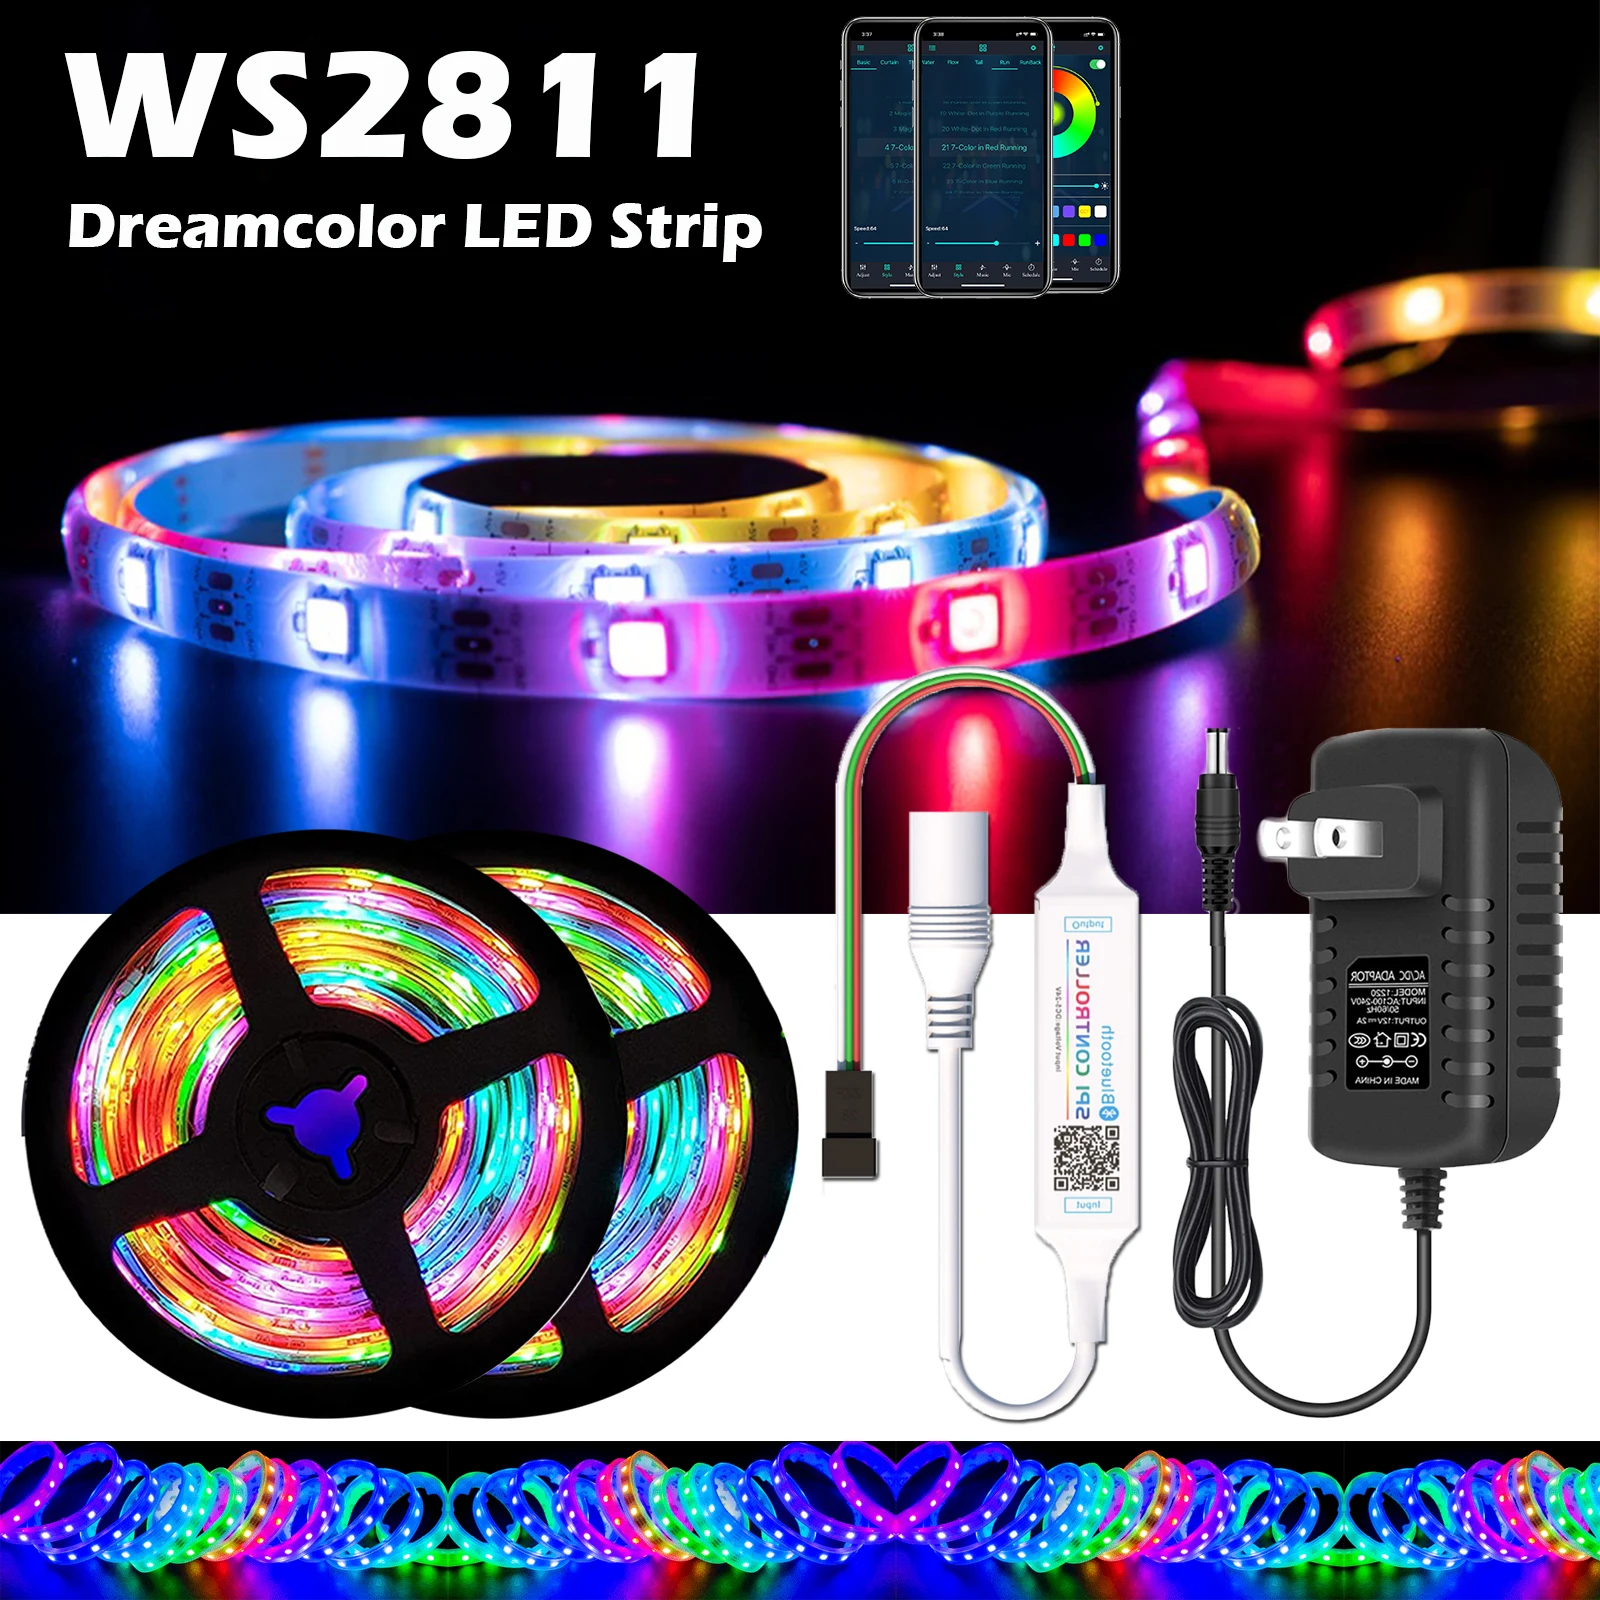 Bluetooth LED Strip RGBIC WS2811 Dreamcolor Light Stip App Control Color Changing Flexible Ribbon For Bedroom living room decor